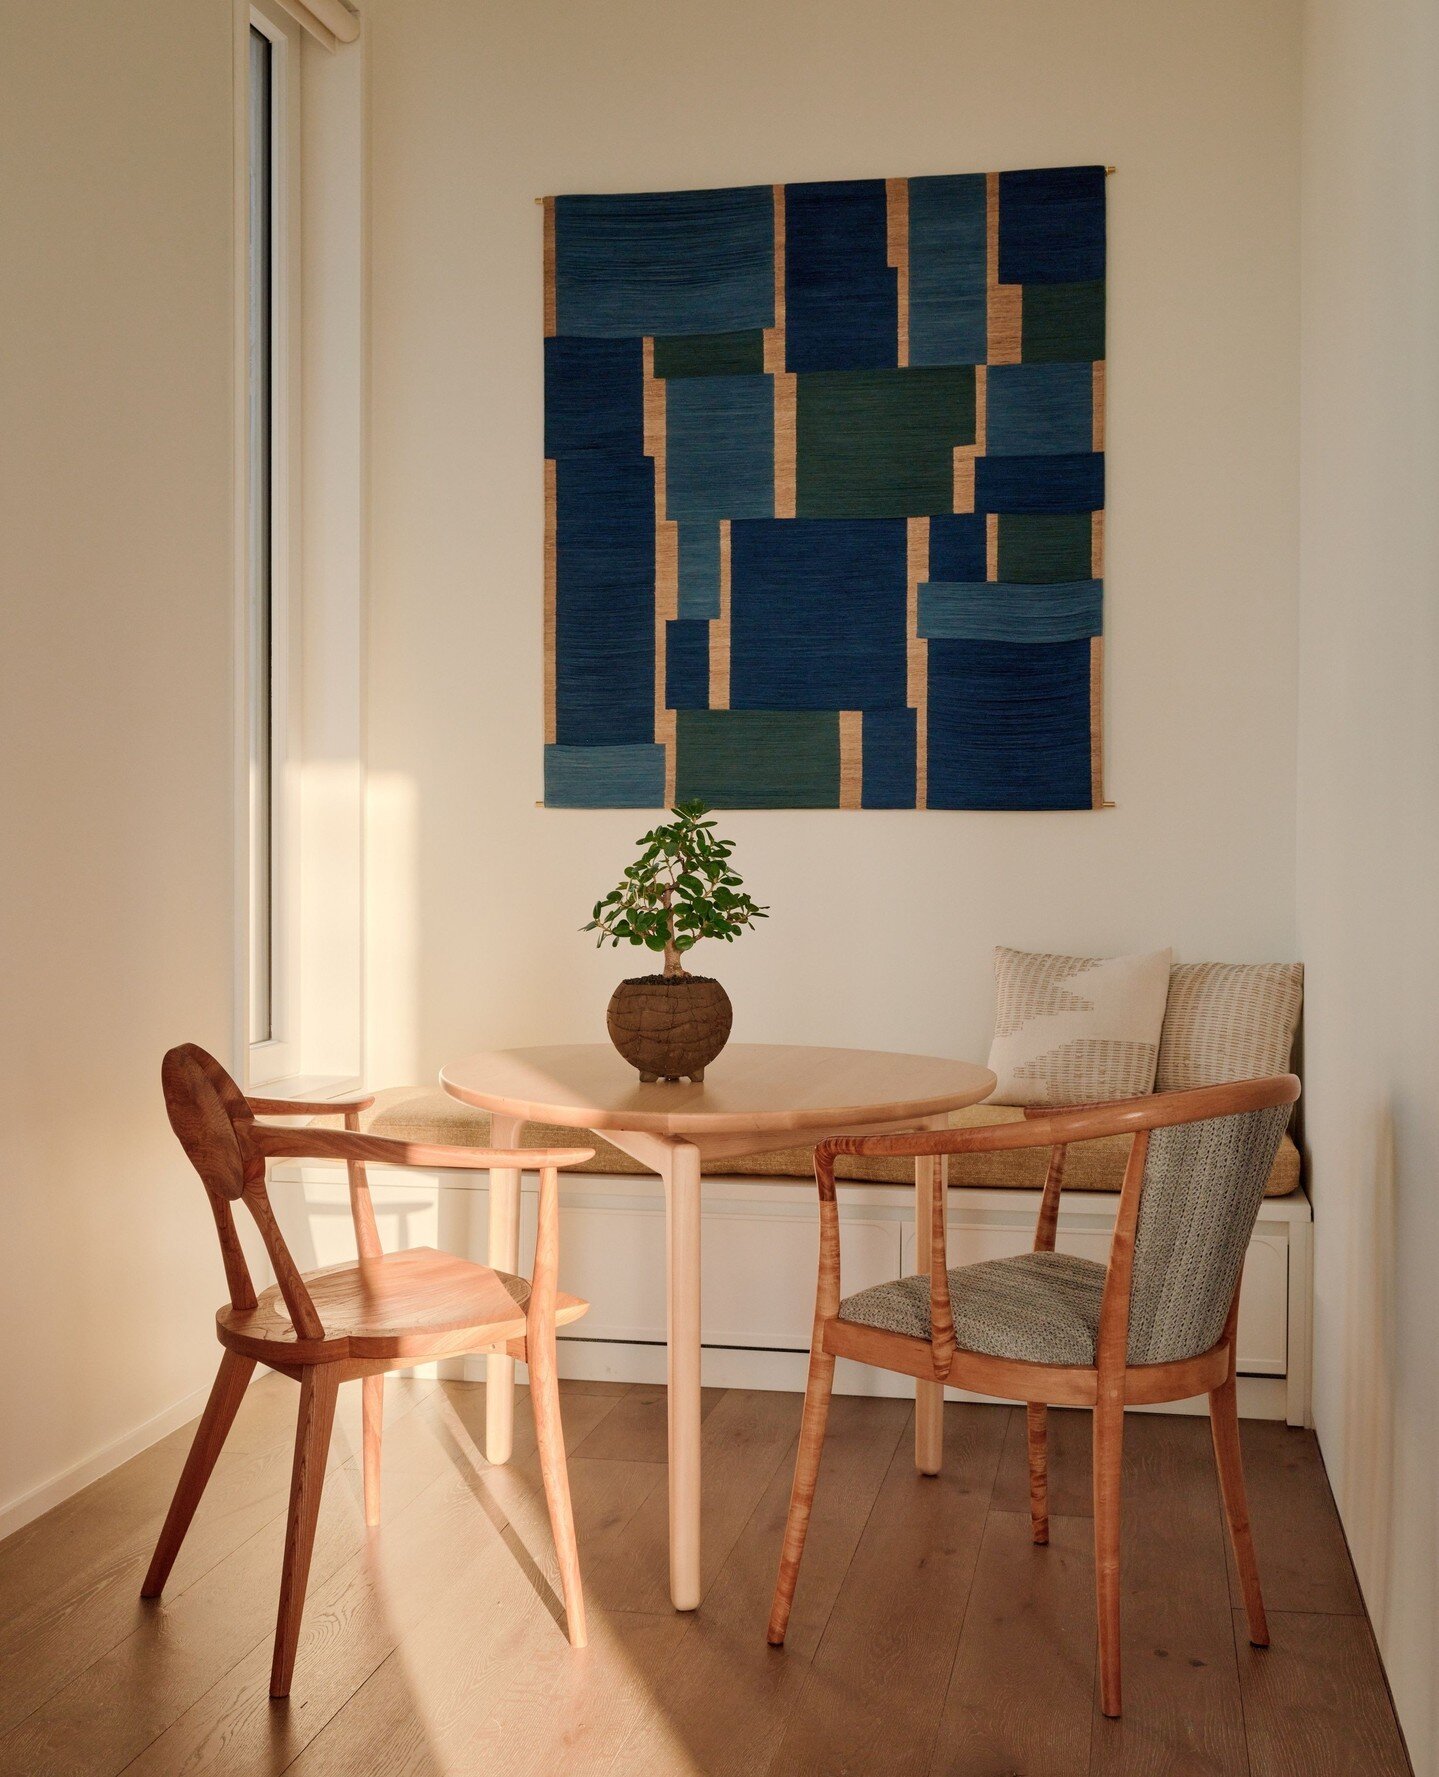 WEAVING 07 INDIGO/TUSSAR - Lina Zedig is a Swedish fiber artist and textile designer. Her work has its origin in Swedish fiber art and textile craft traditions and is heavily influenced by the folk art of Japan and India &ndash; places to which she h